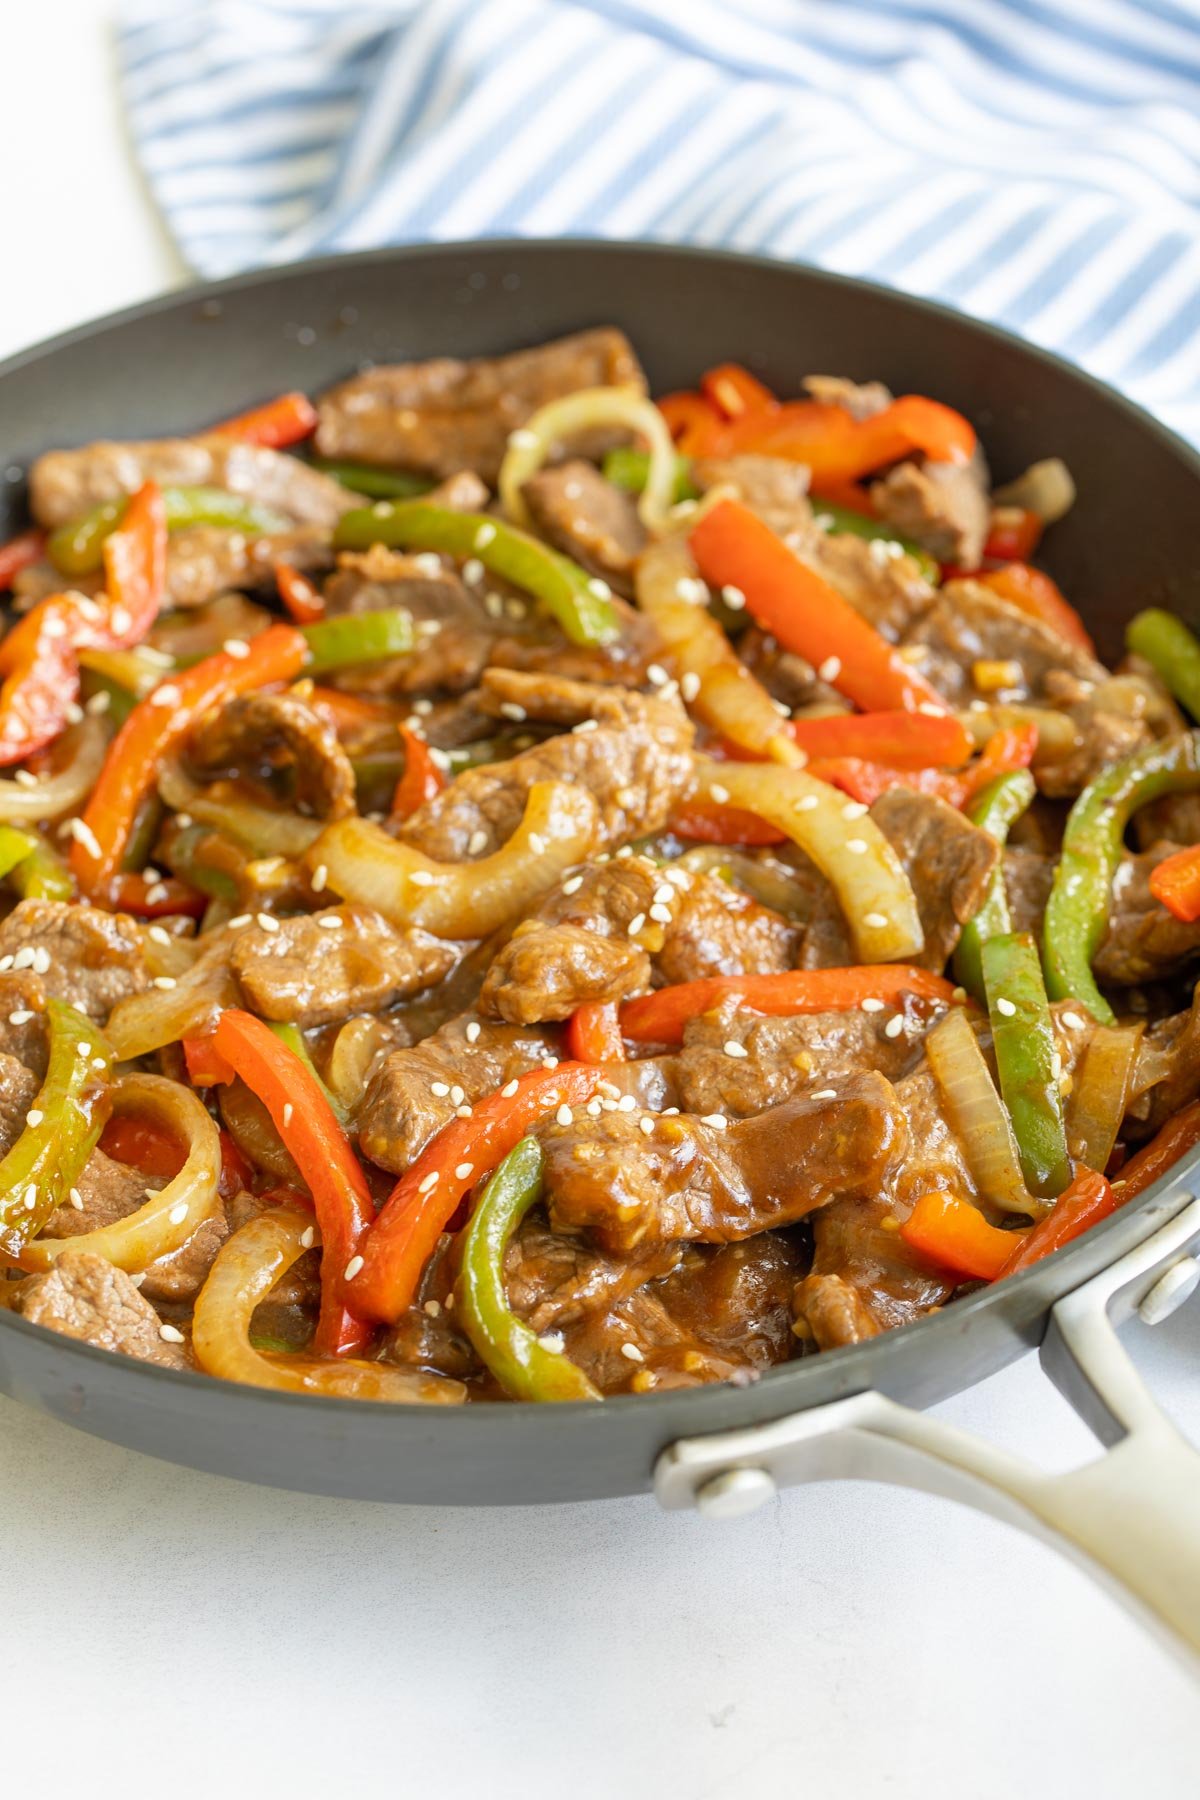 Front closeup view of Chinese pepper steak and onions in a skillet.